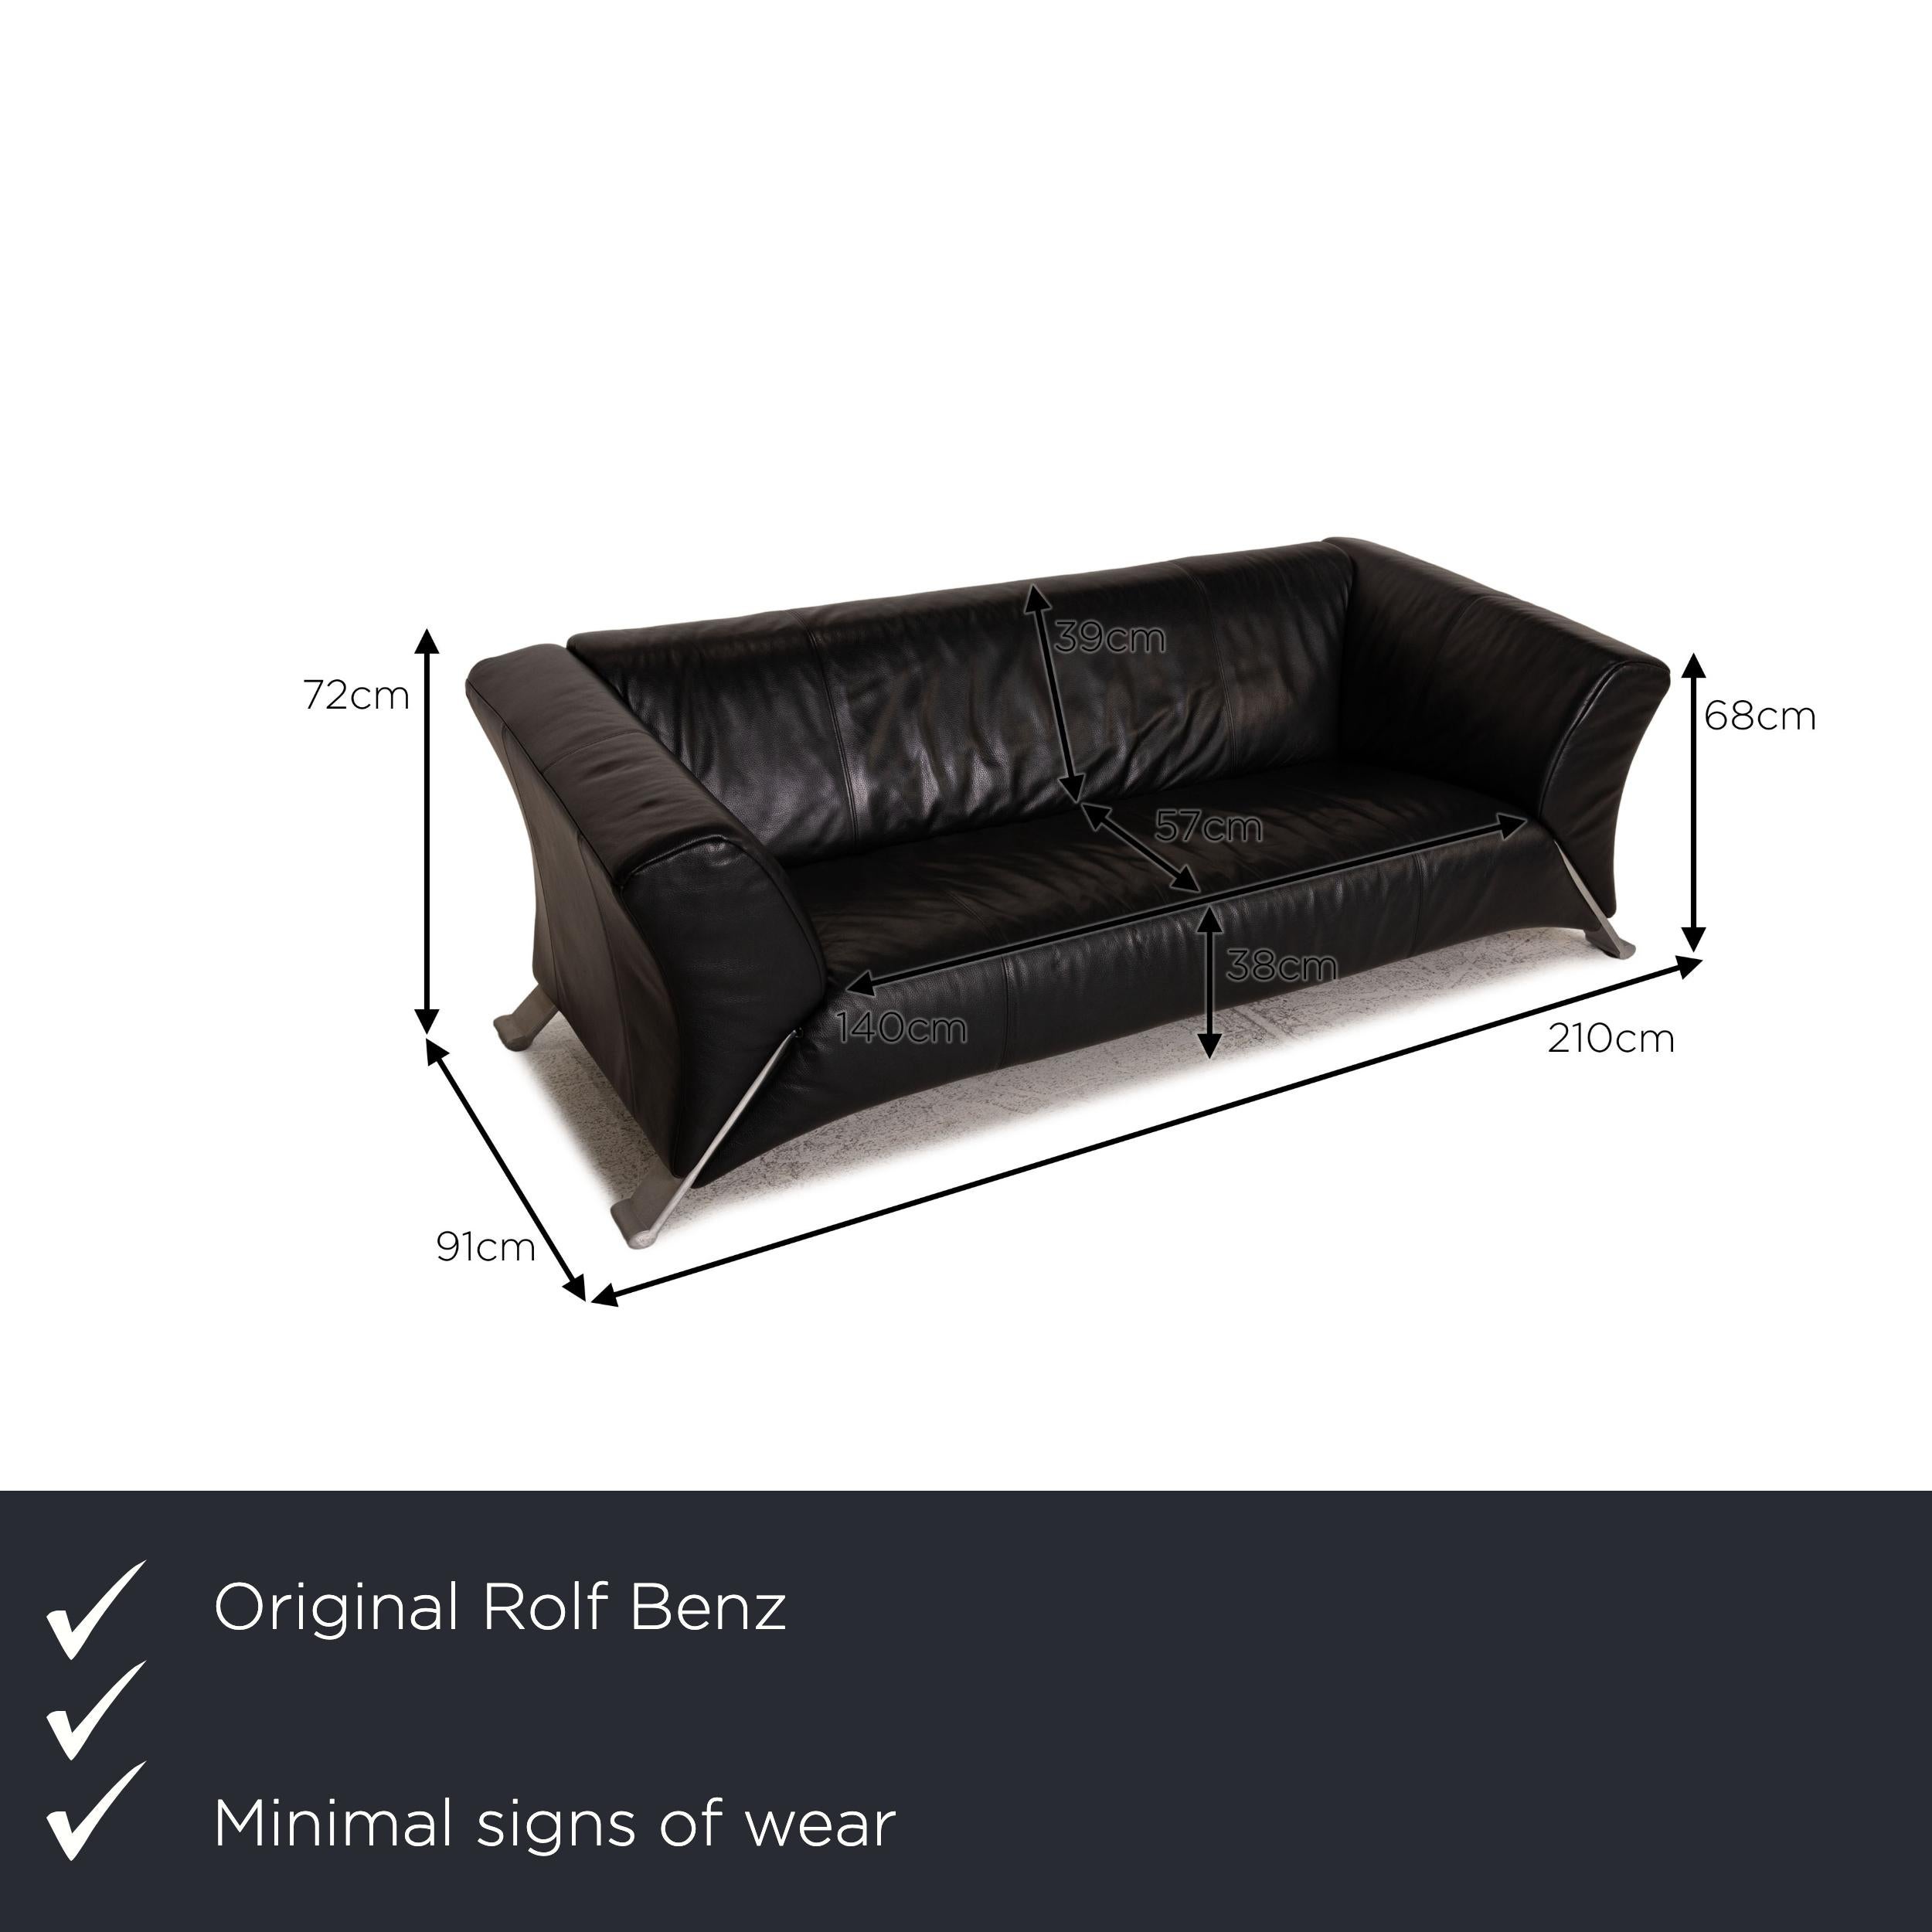 We present to you a Rolf Benz 322 leather sofa black three-seater couch.

Product measurements in centimeters:

depth: 91
width: 210
height: 72
seat height: 38
rest height: 68
seat depth: 57
seat width: 140
back height: 39.

 